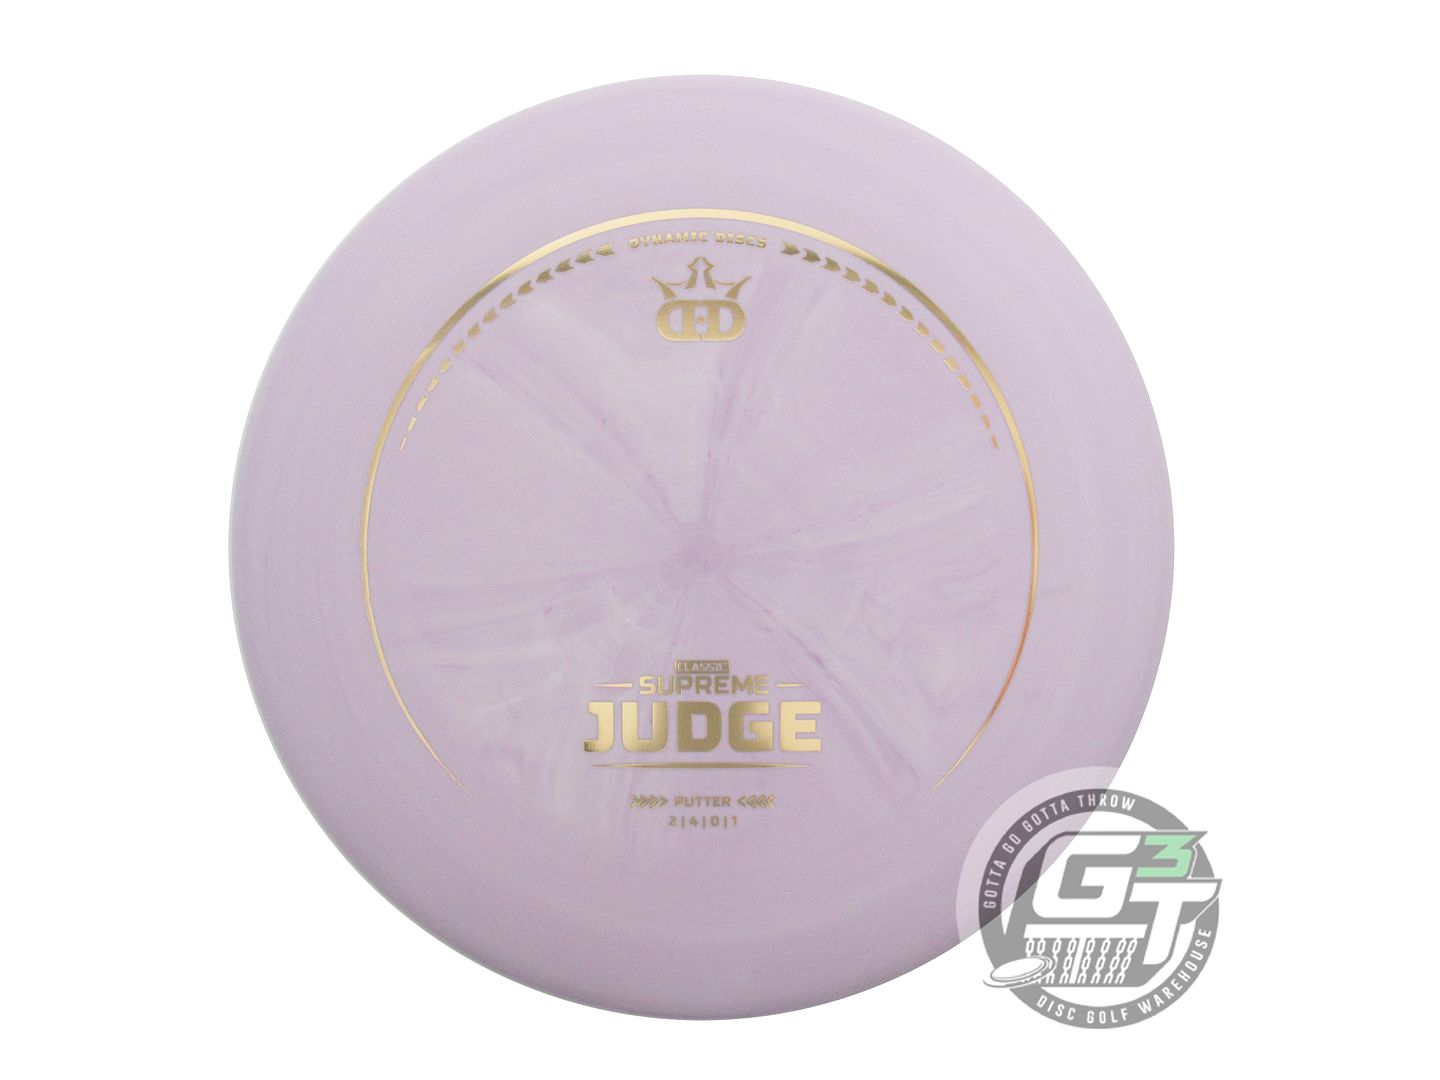 Dynamic Discs Classic Supreme Judge Putter Golf Disc (Individually Listed)